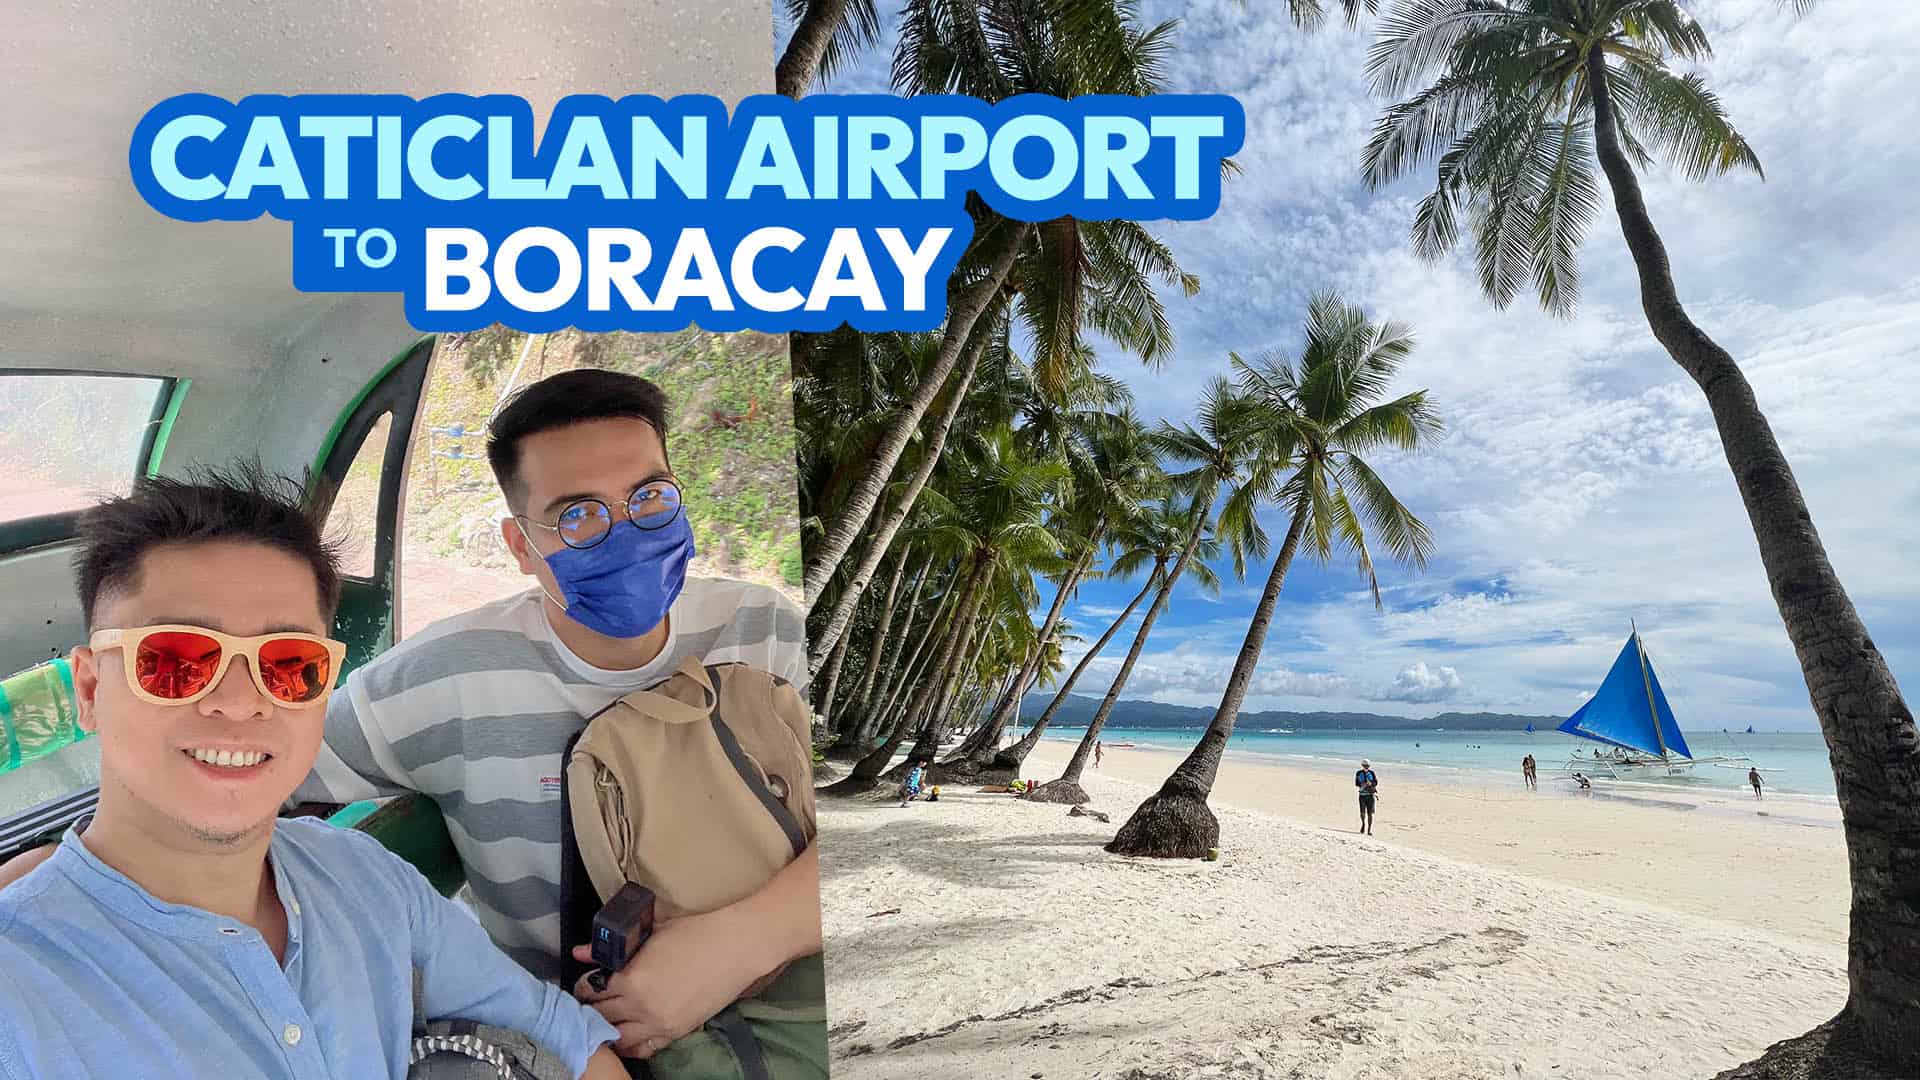 CATICLAN AIRPORT TO BORACAY Travel Guide